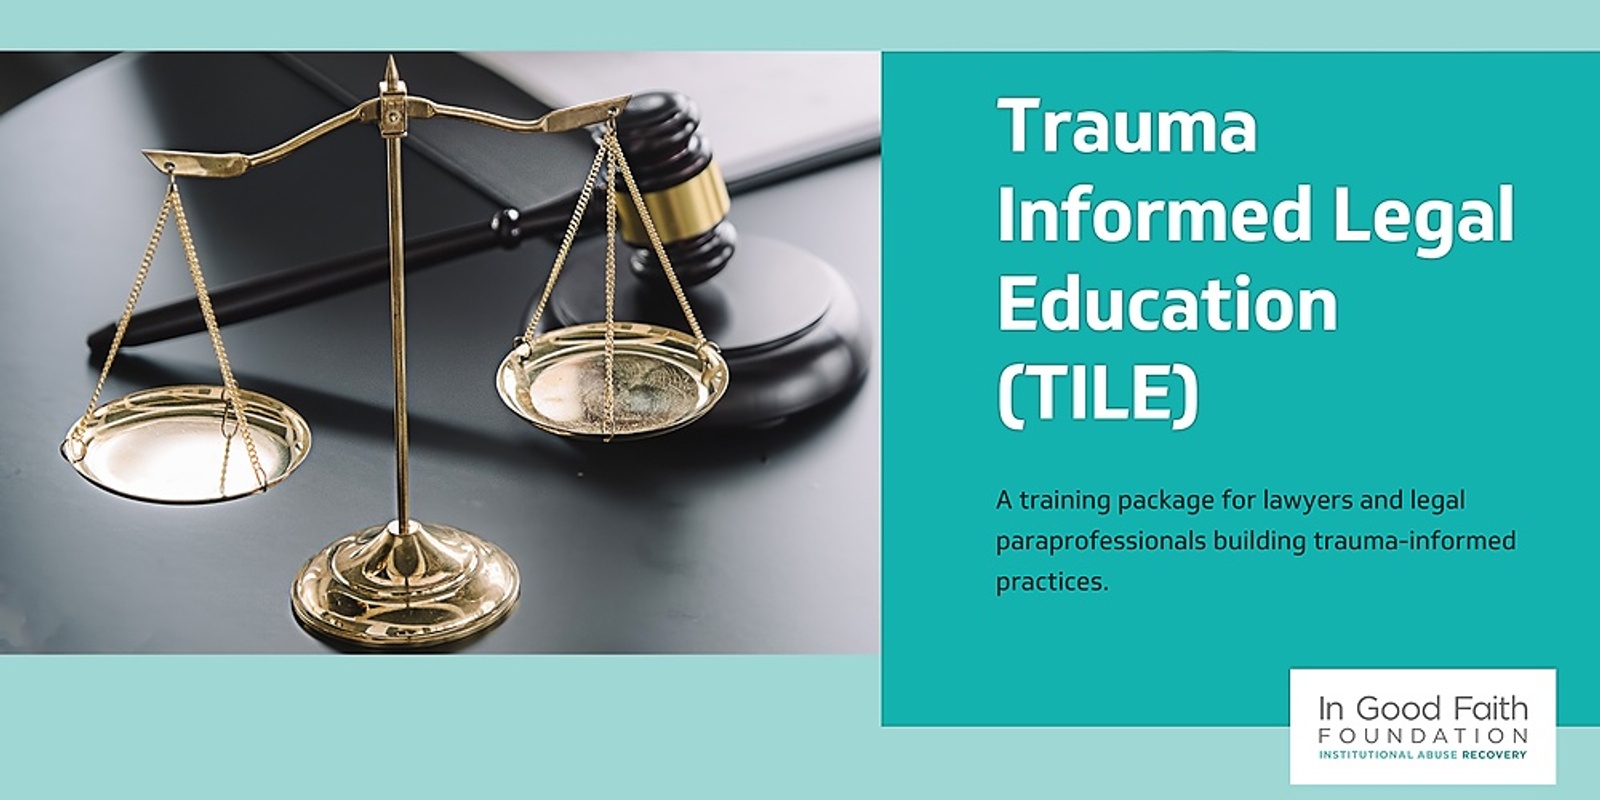 make　How　Humanitix　Legal　to　your　(TILE)　Practice　trauma-informed